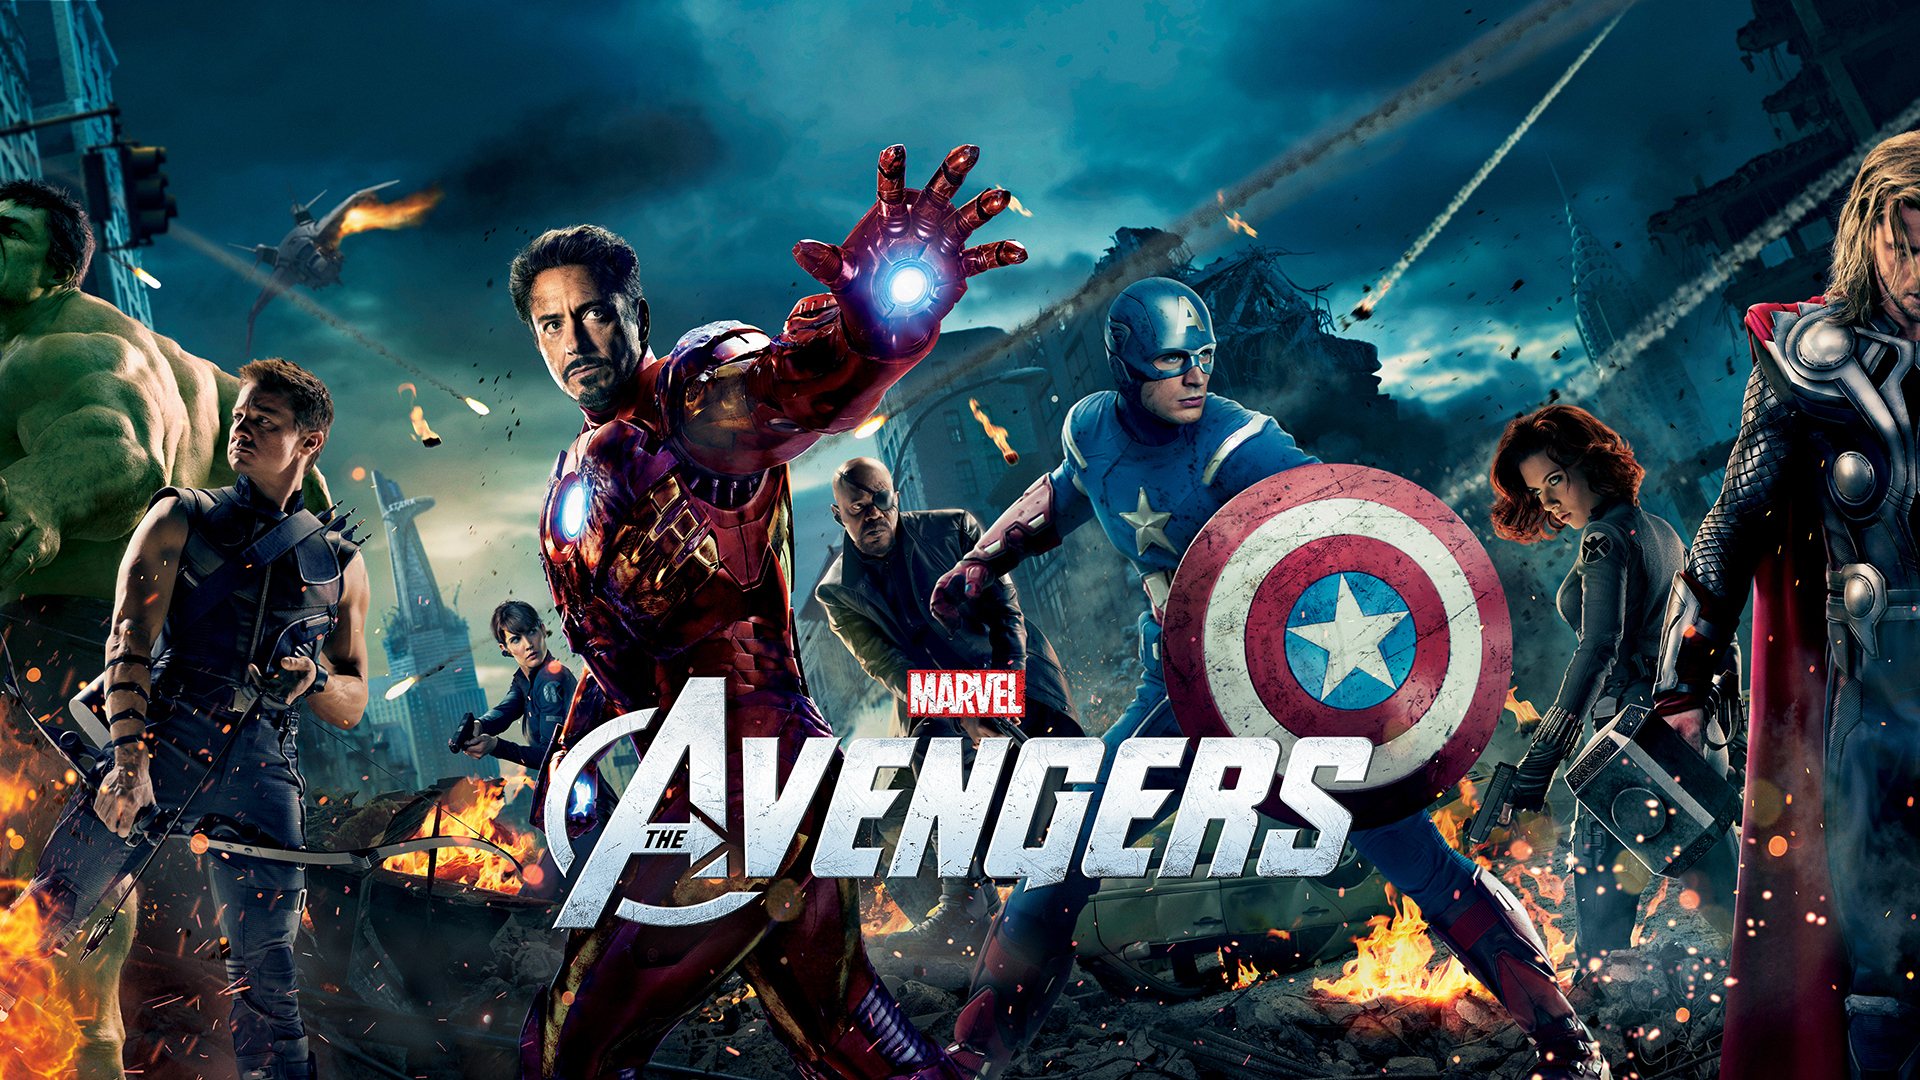 The Avengers wallpaper Pictures Photos